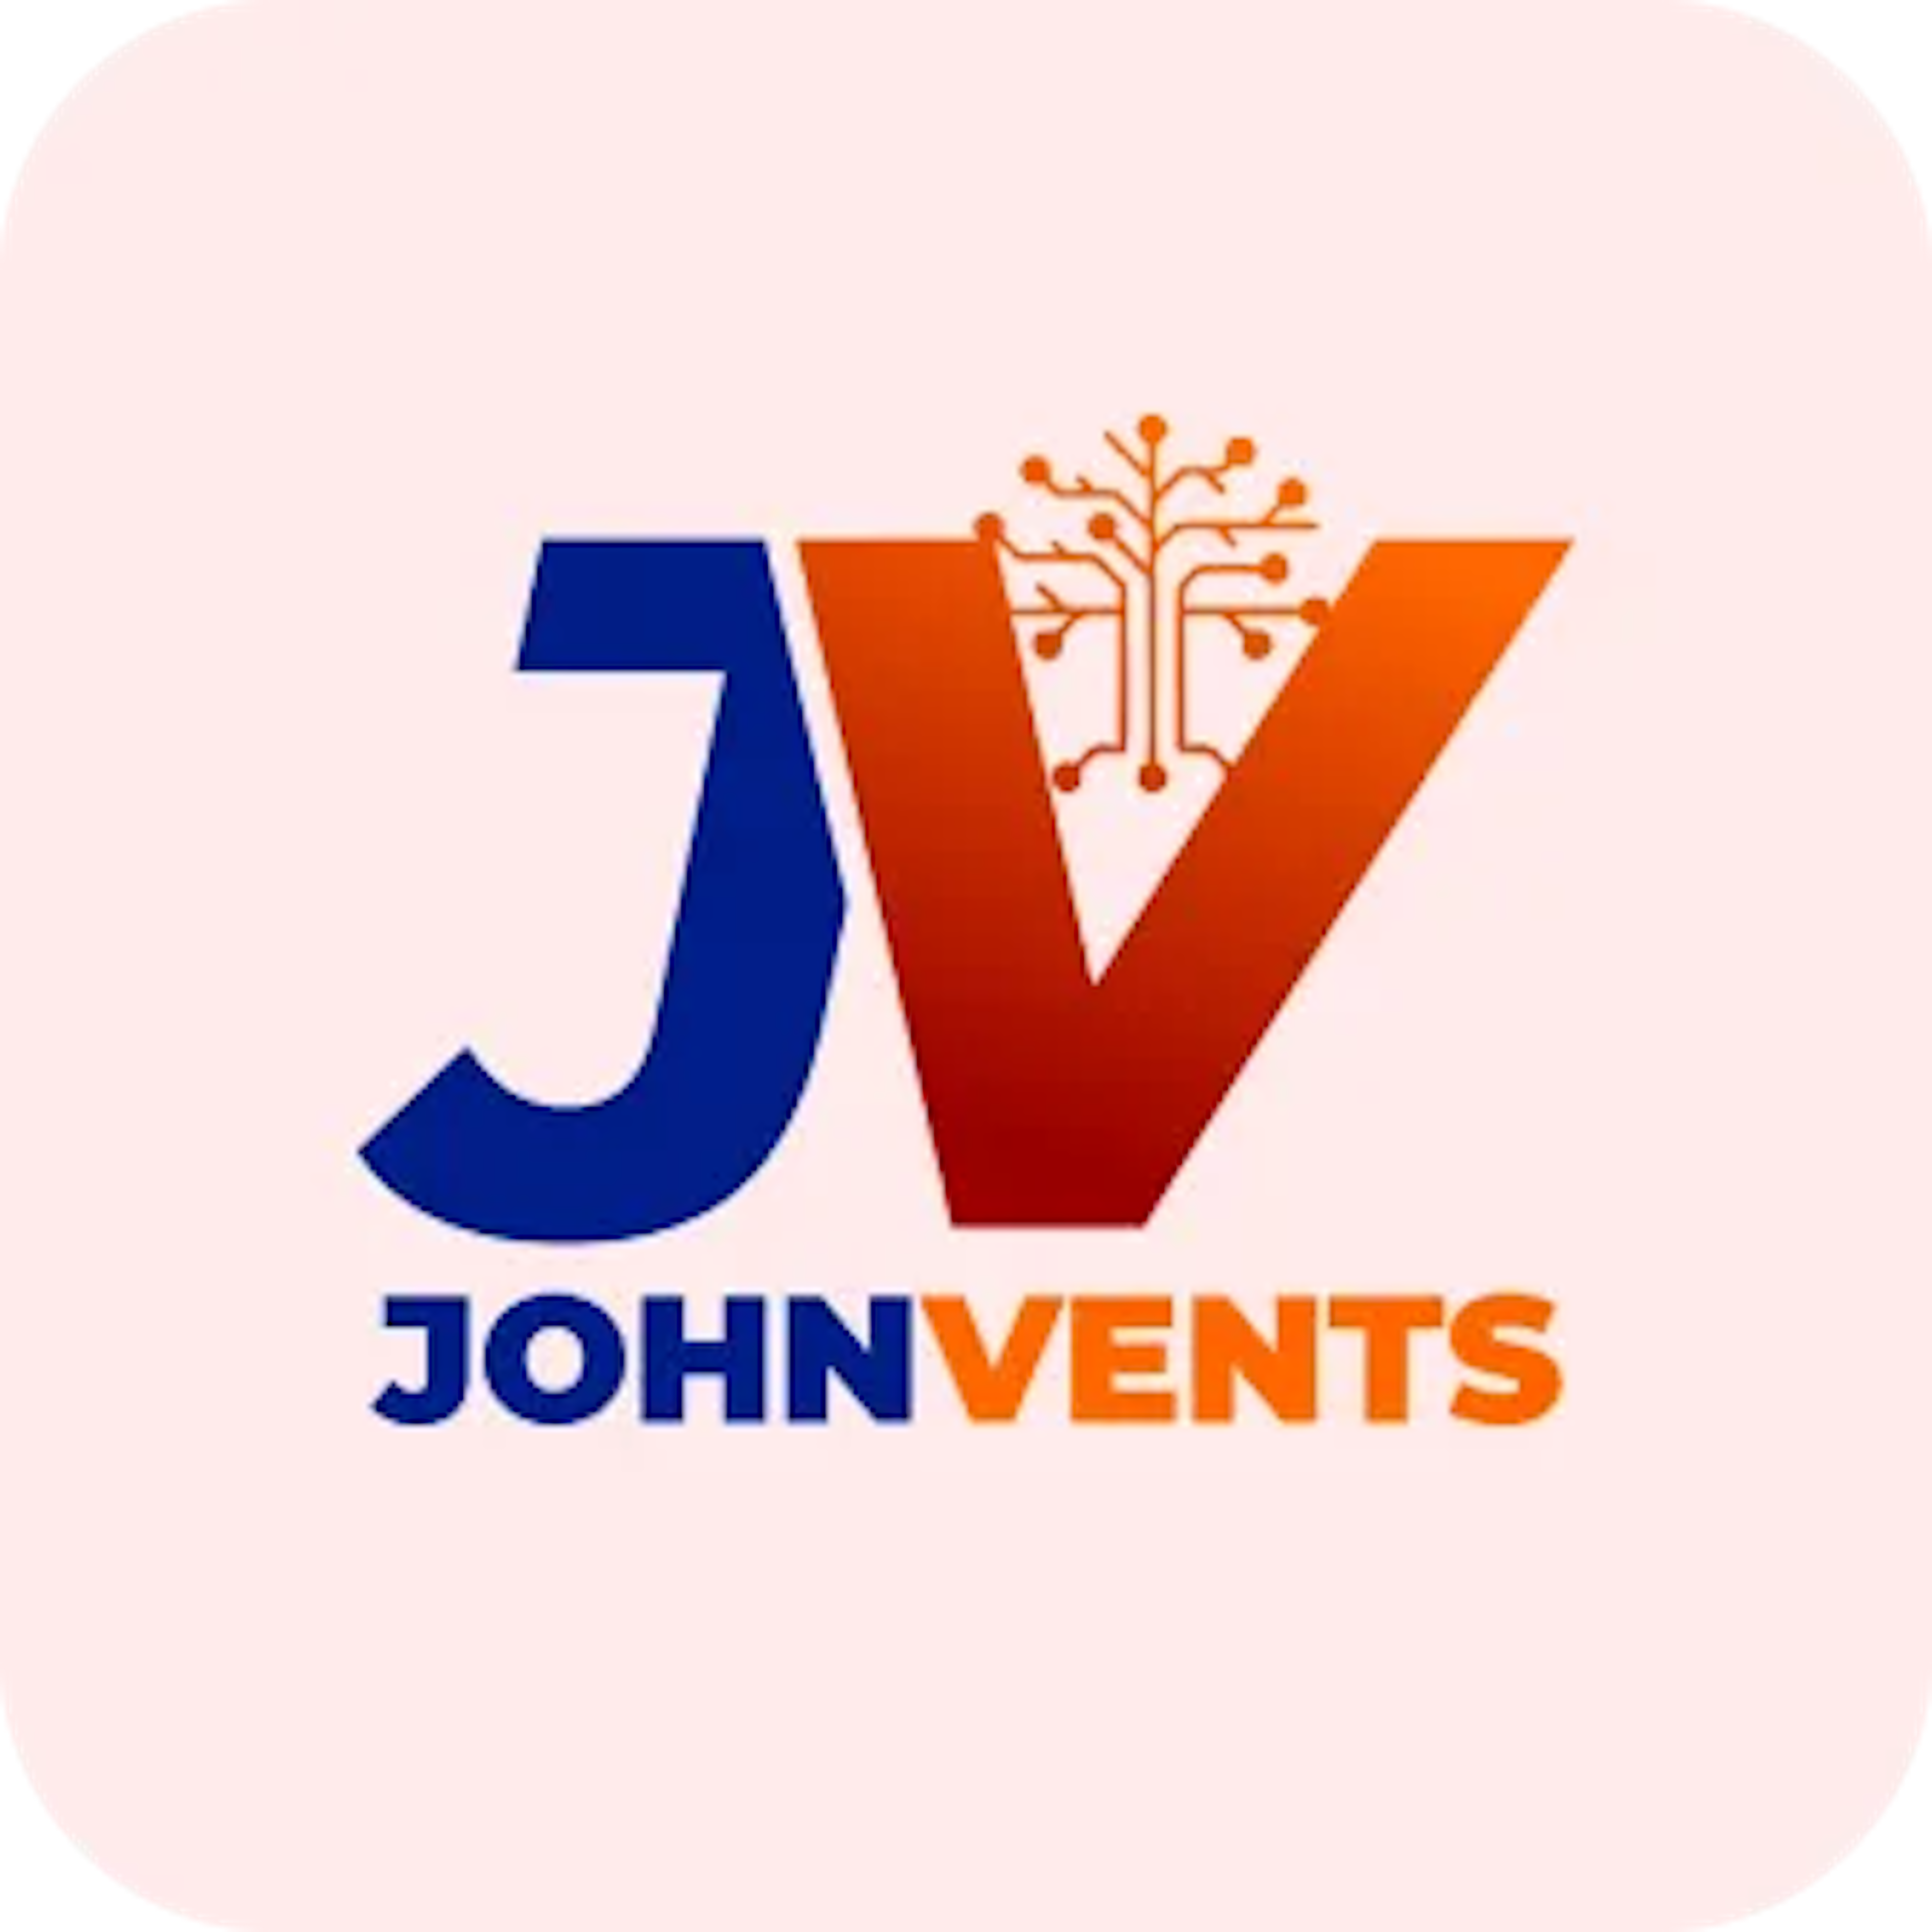 Johnvents Industries Limited